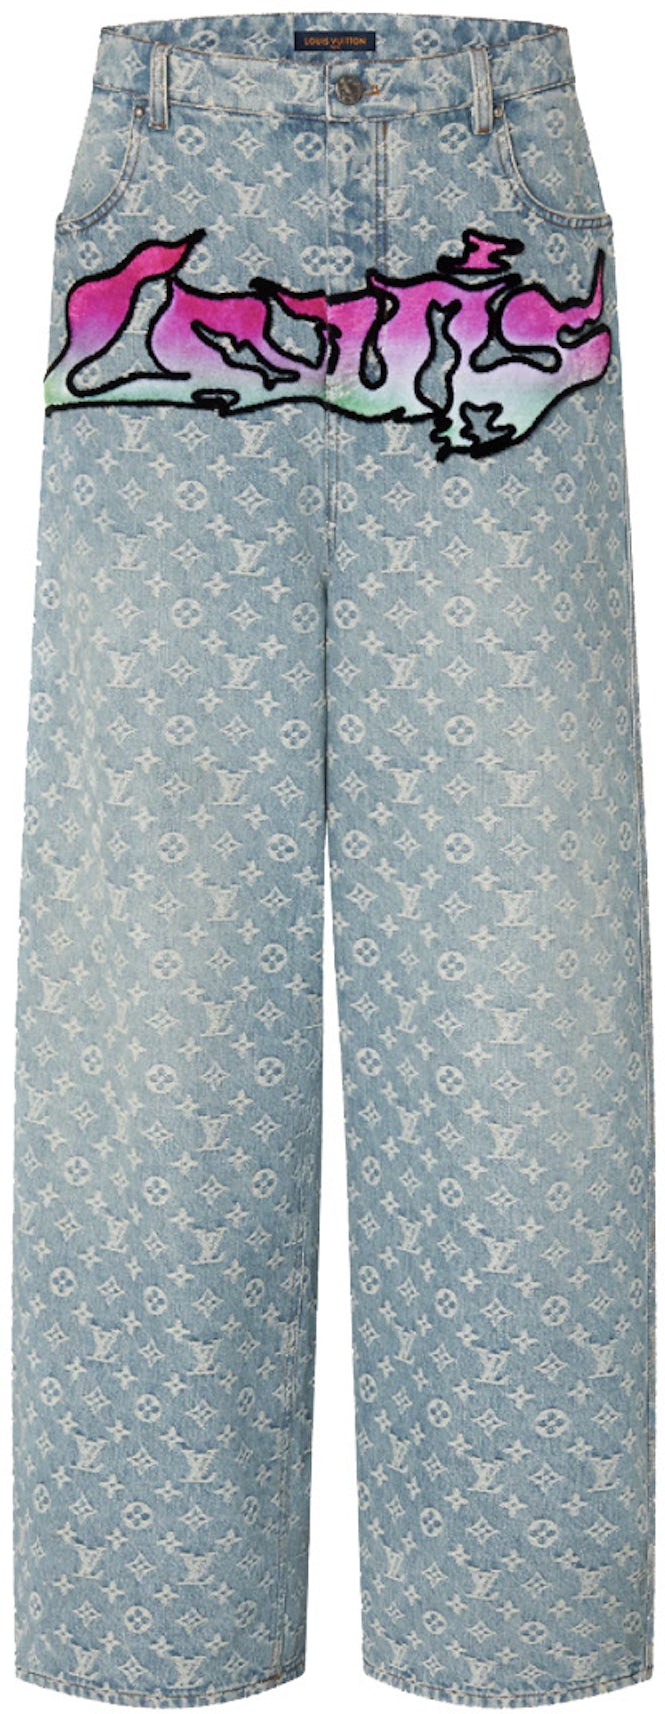 Products By Louis Vuitton: Lvse Damier Sweat Pants